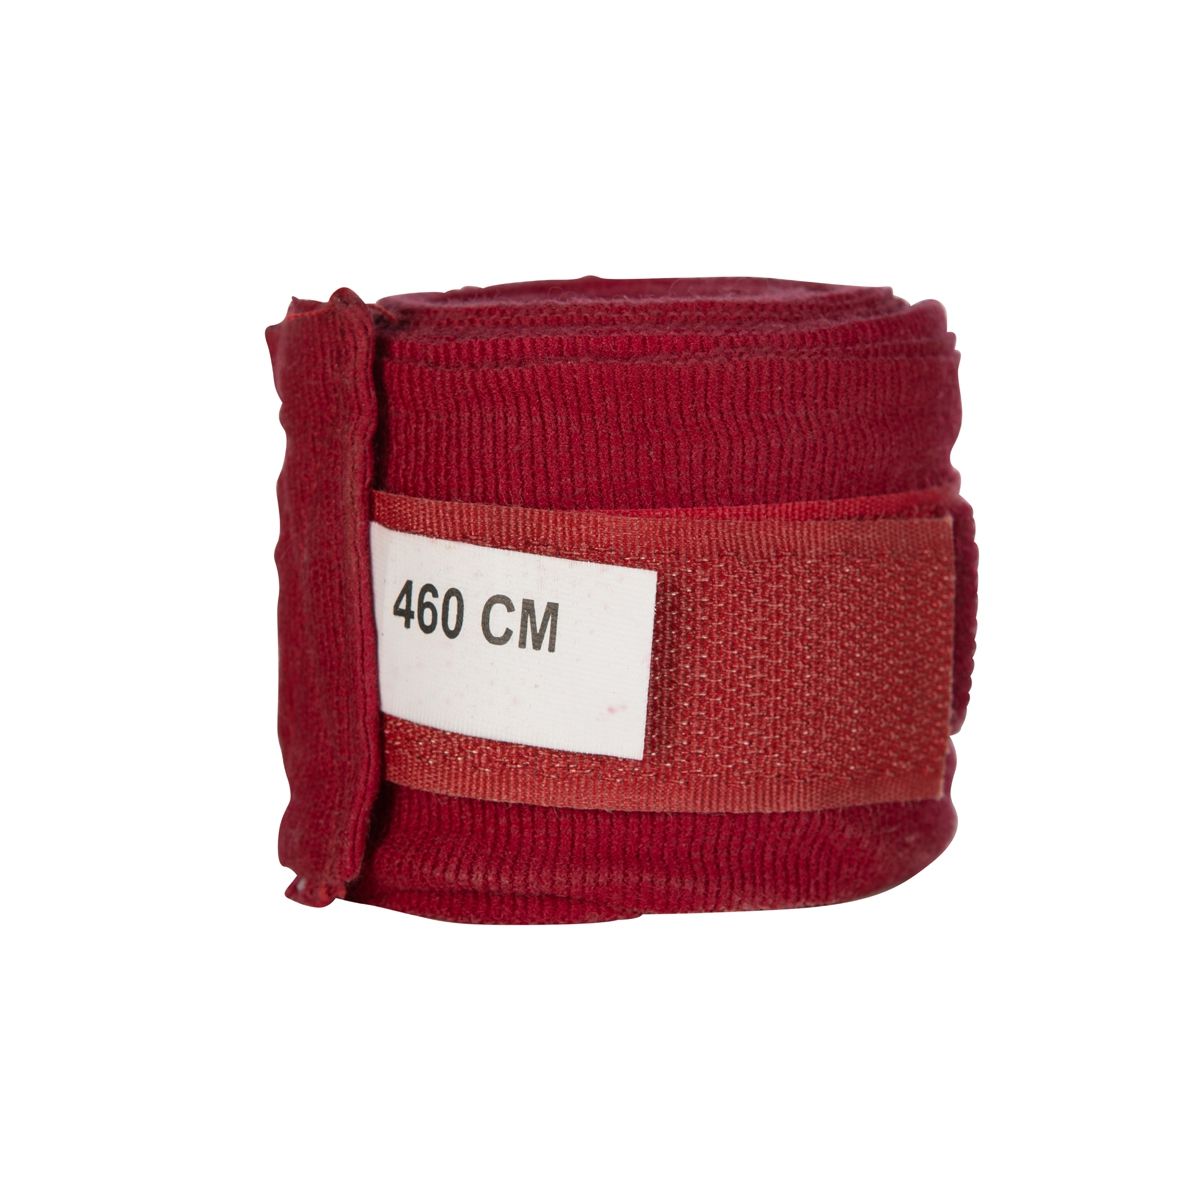 Booster Fightgear - bandages - BPC wine red